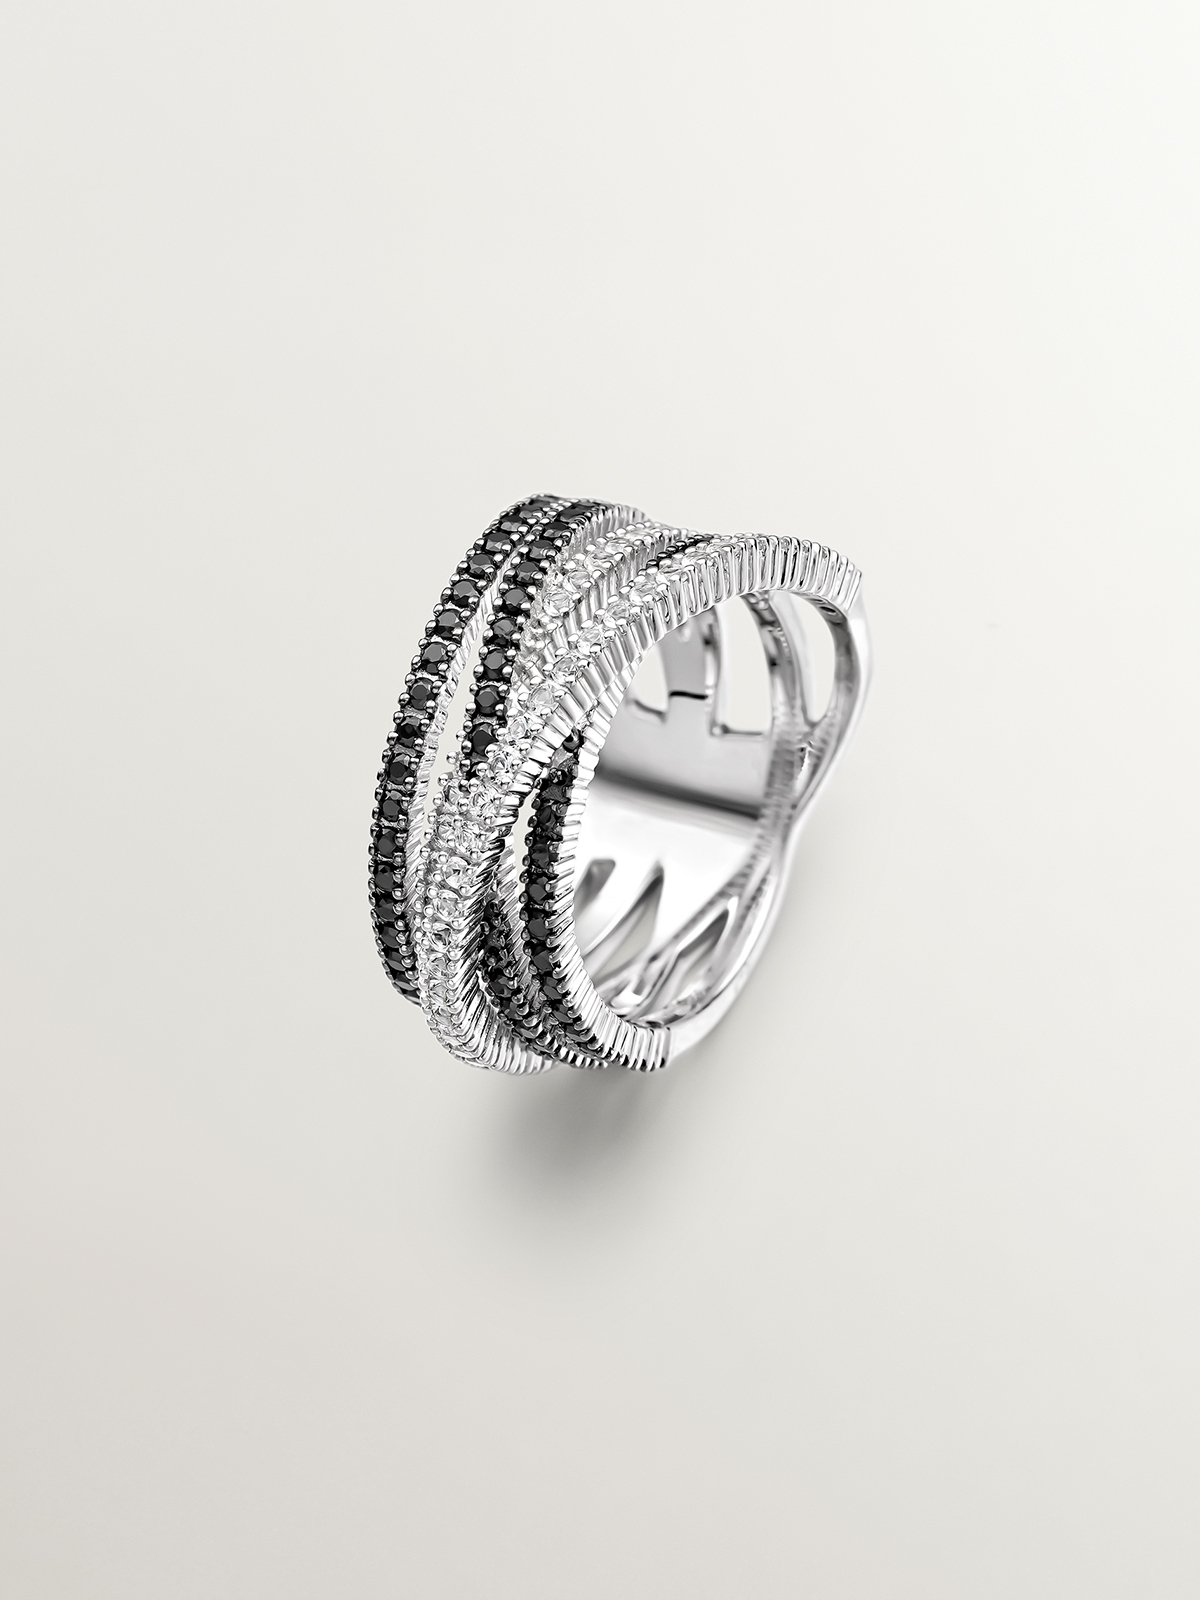 Crossed multi-arm 925 silver ring with white topazes and black spinels.